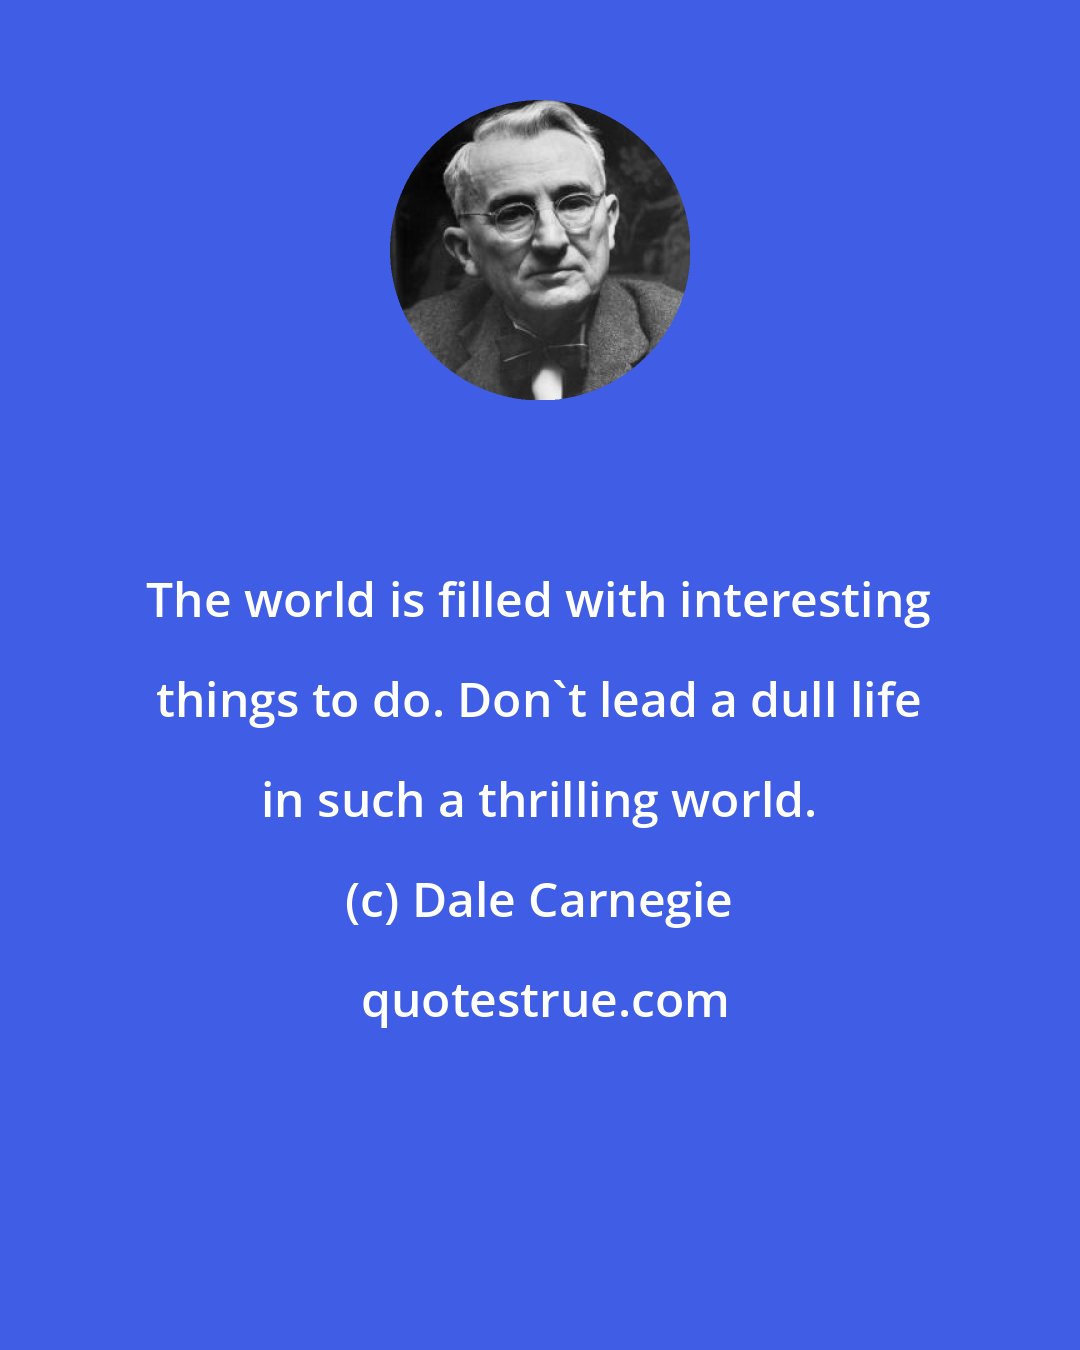 Dale Carnegie: The world is filled with interesting things to do. Don't lead a dull life in such a thrilling world.